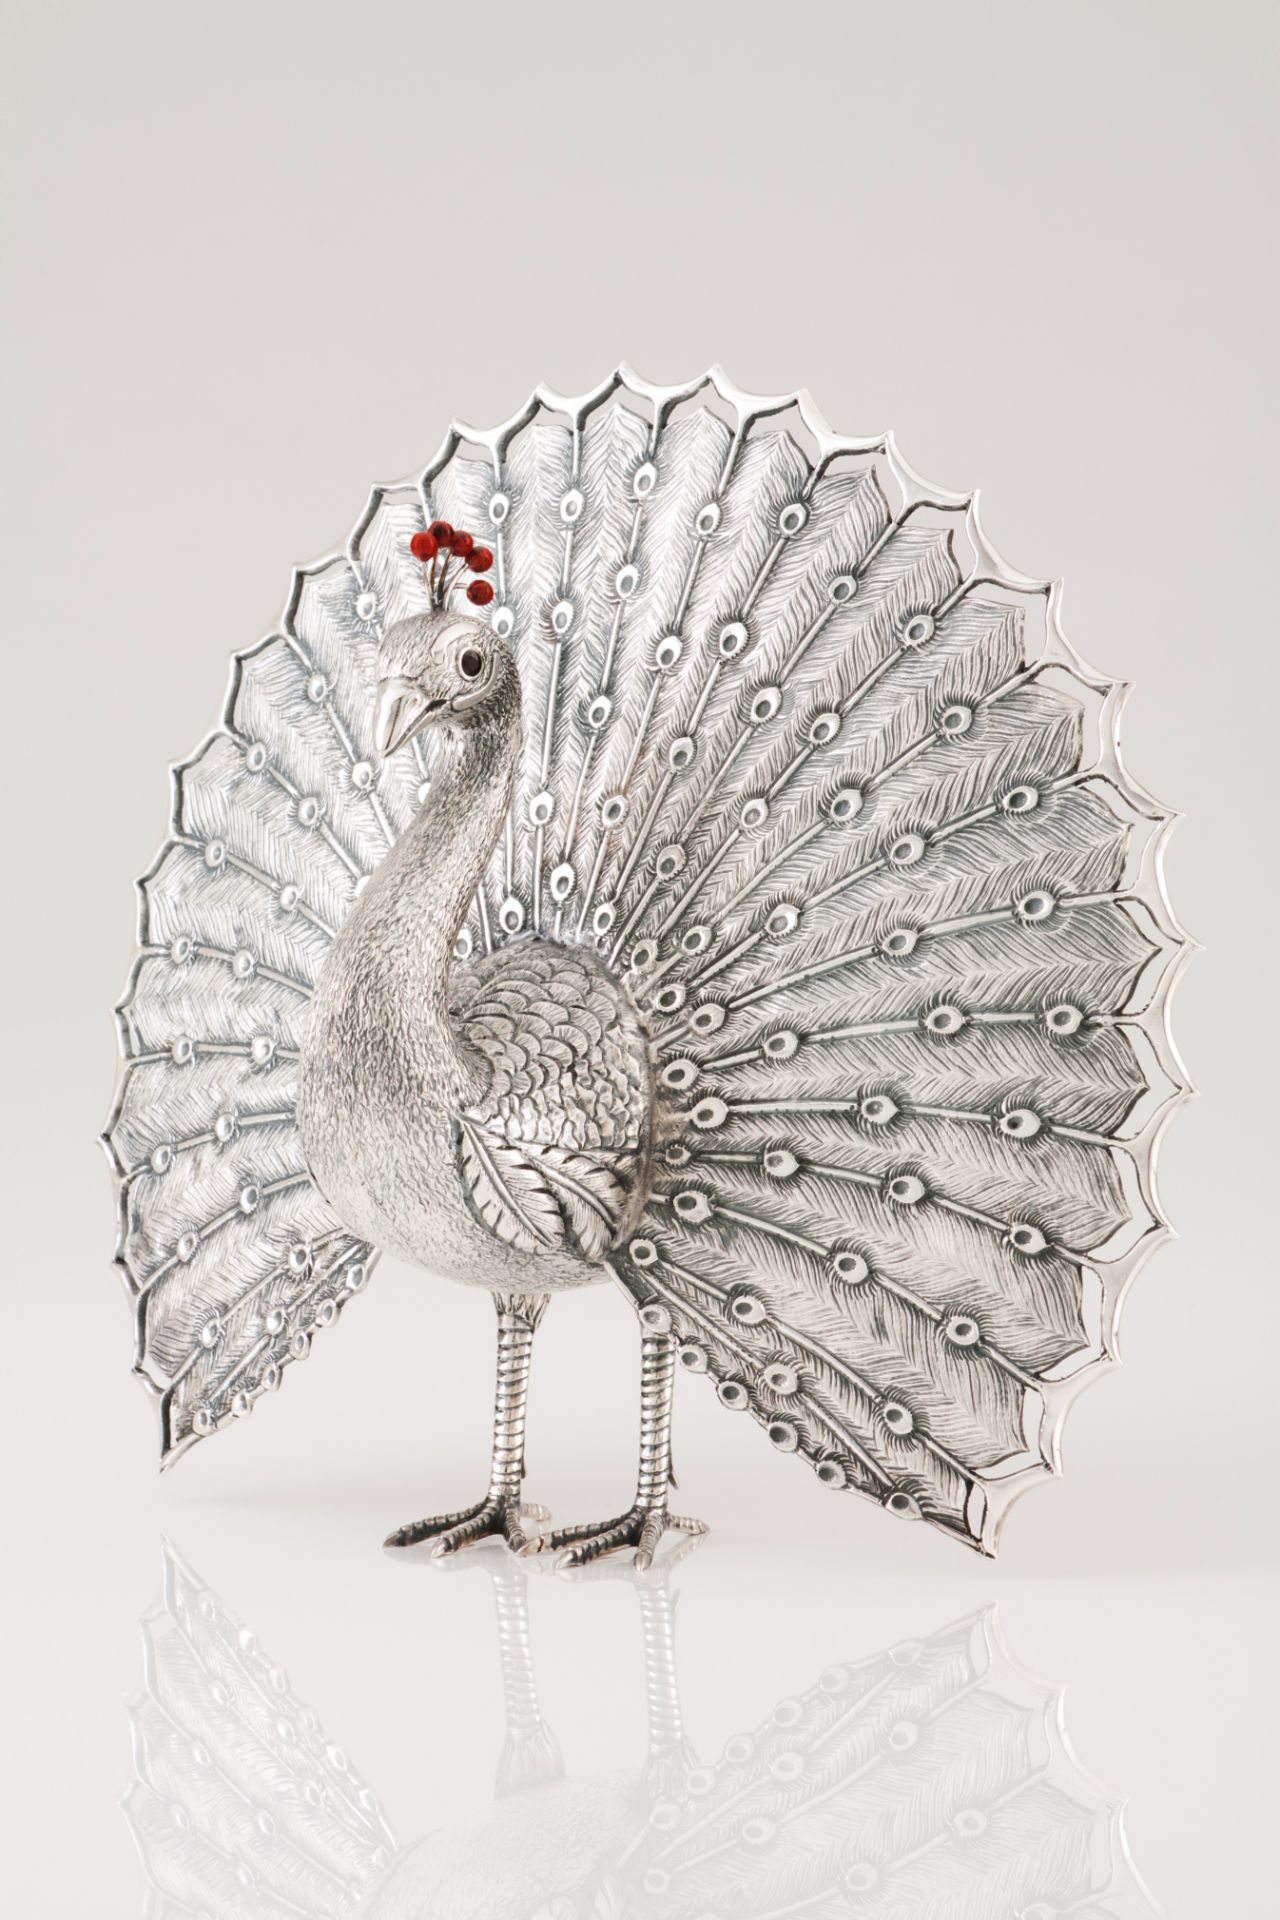 A peacockPortuguese silver and hardstone Moulded, engraved and chiselled decoration with applied red